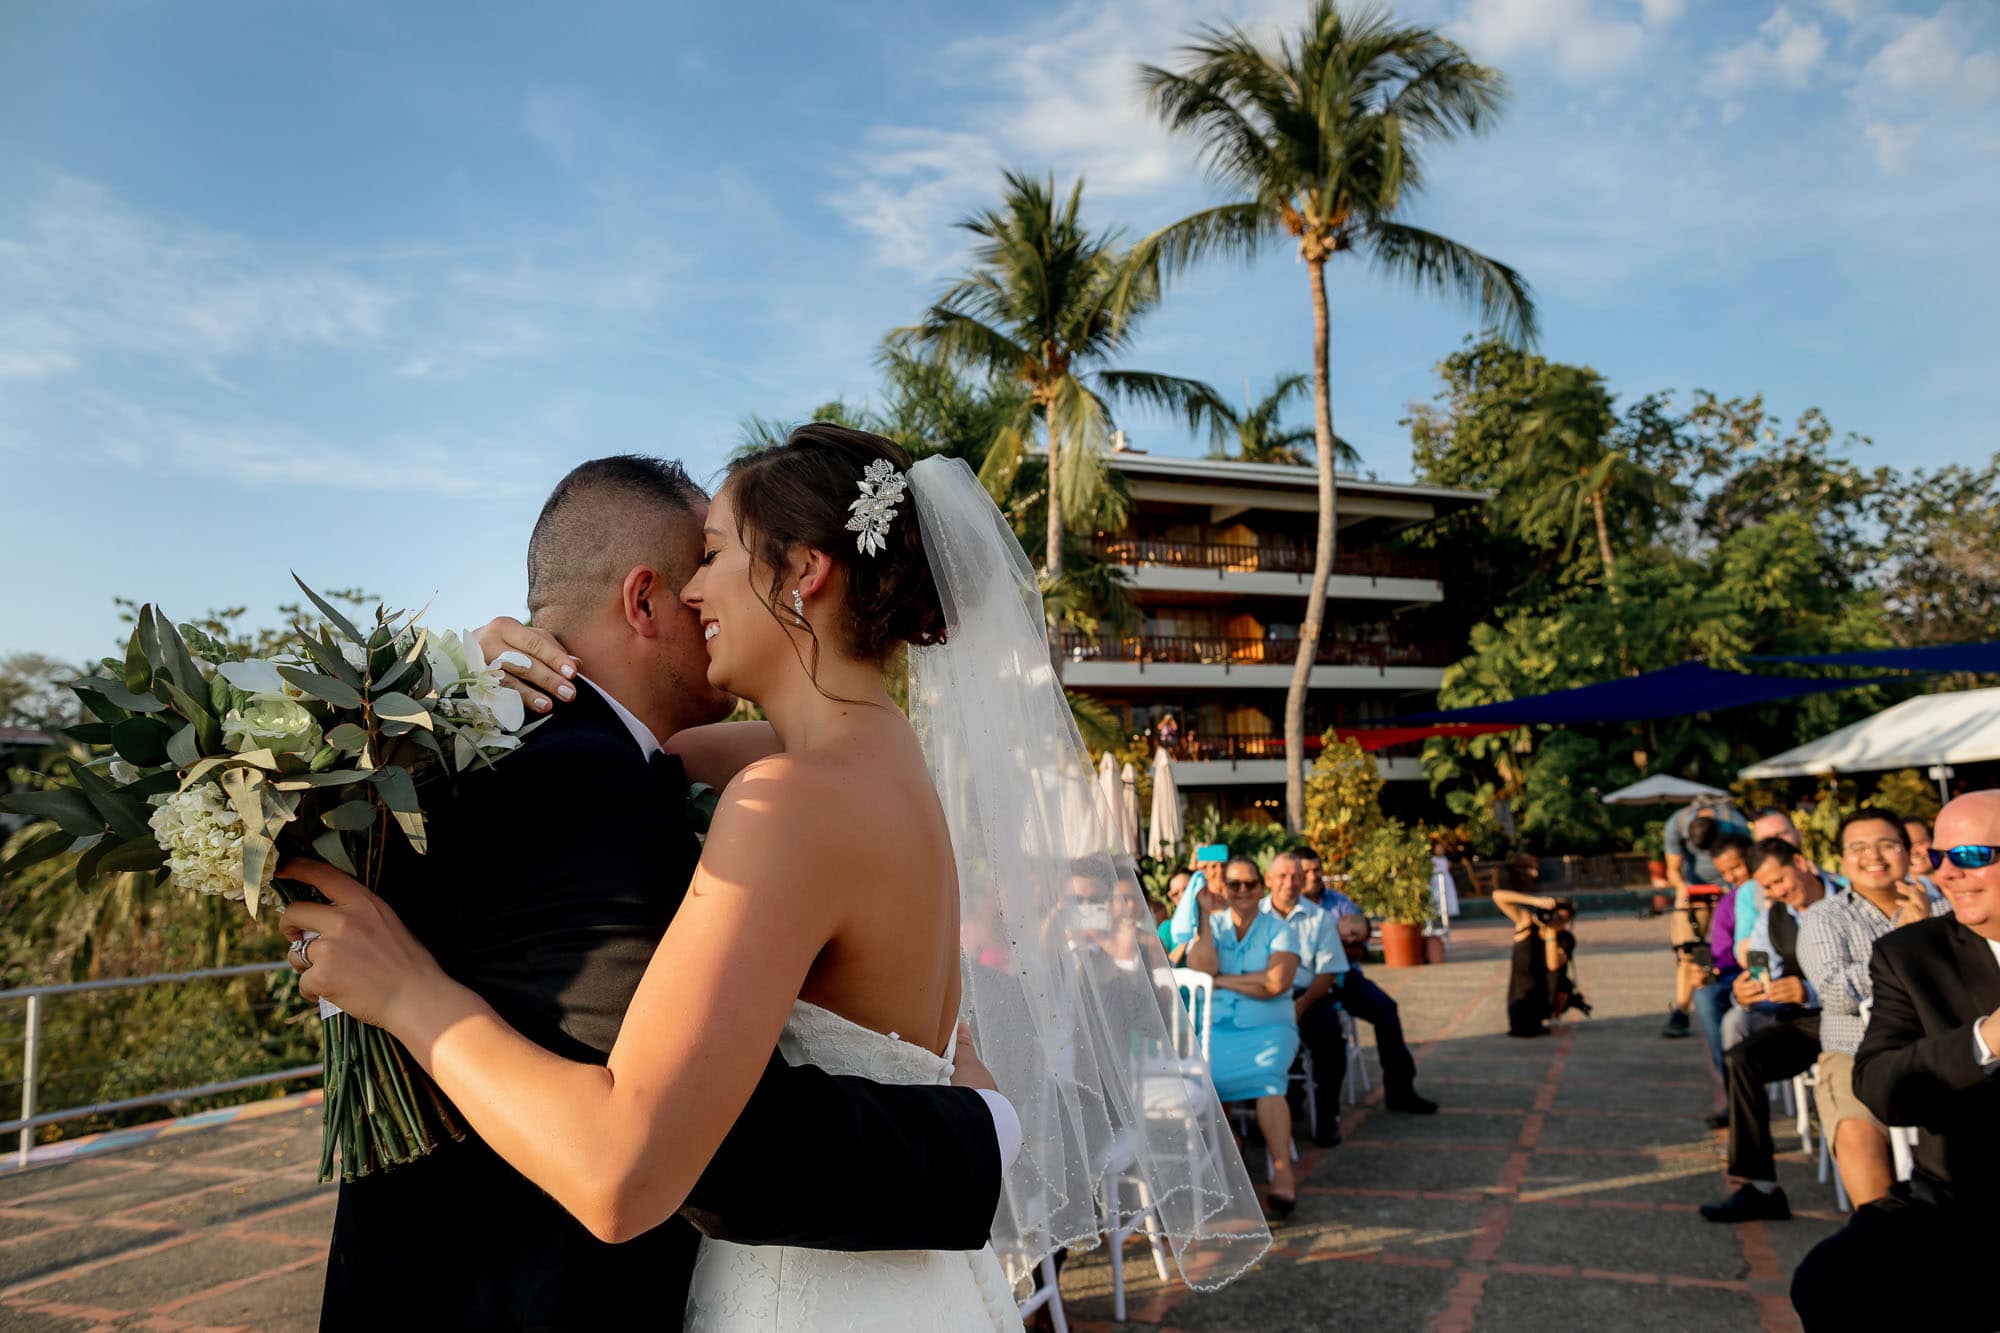 The bride and groom share a hug on the helipad at Costa Verde